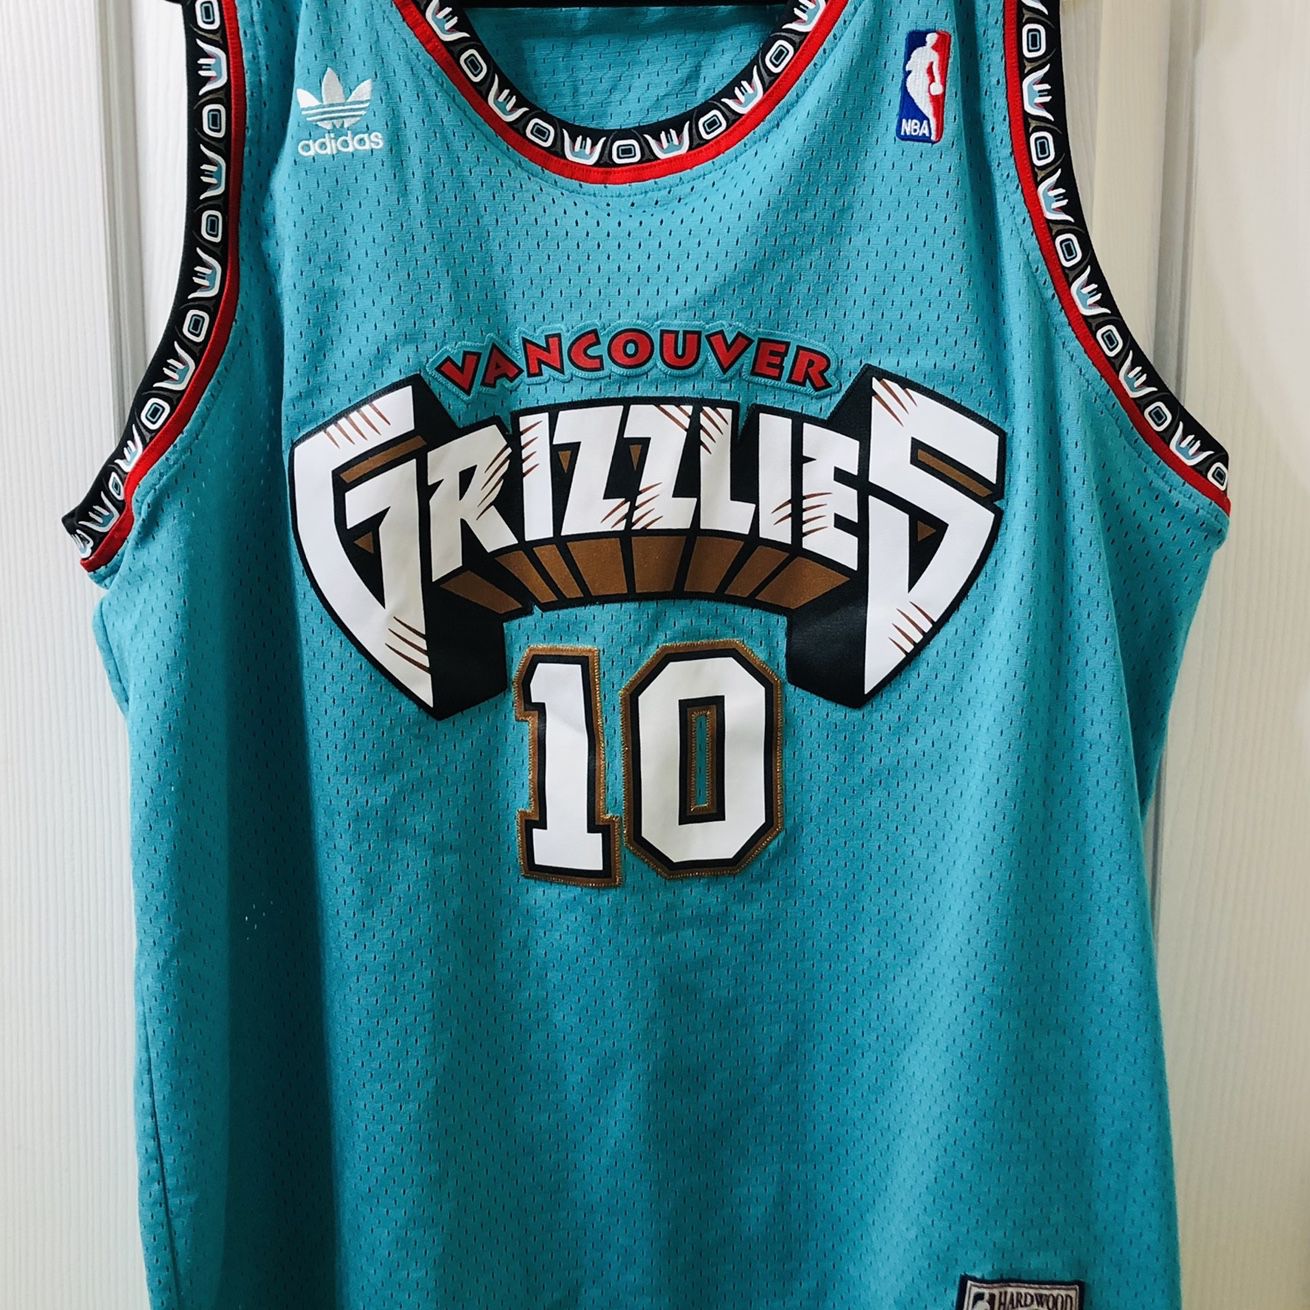 Mike Bibby #10 Vancouver Grizzlies Throwback Jersey for Sale in